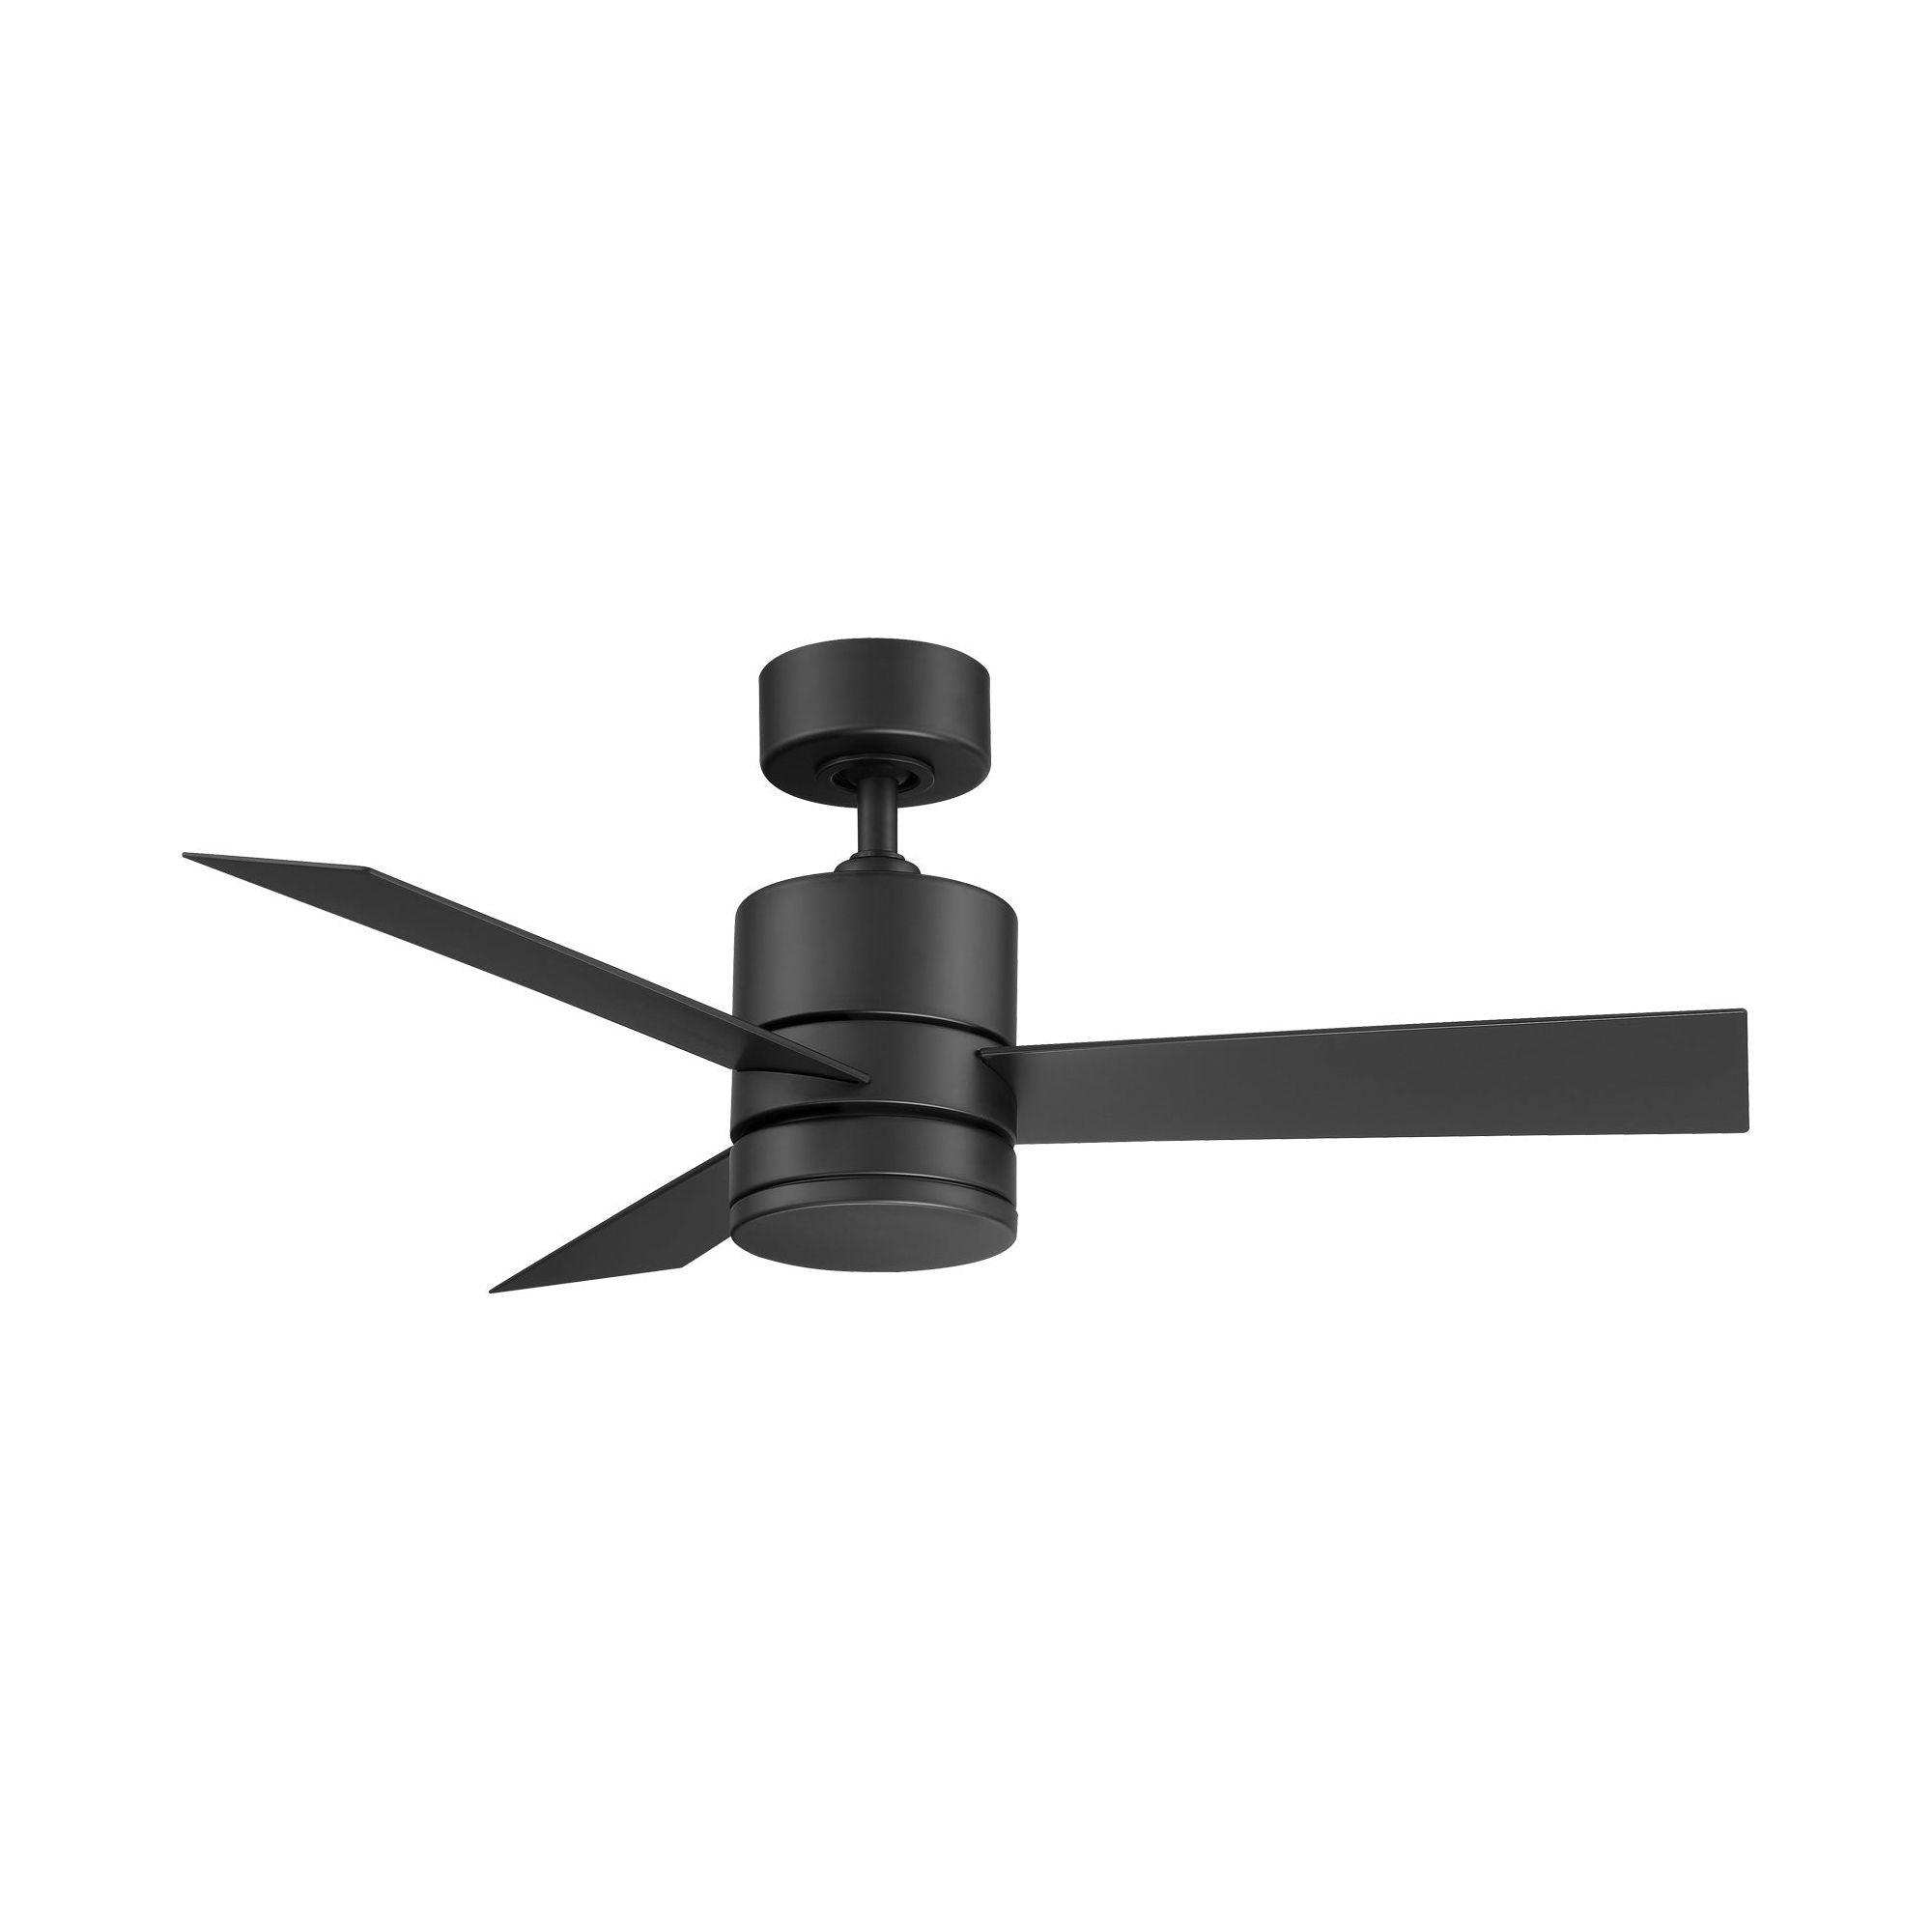 Modern Forms - Axis Indoor/Outdoor 3-Blade 44" Smart Ceiling Fan with LED Light Kit and Remote Control - Lights Canada